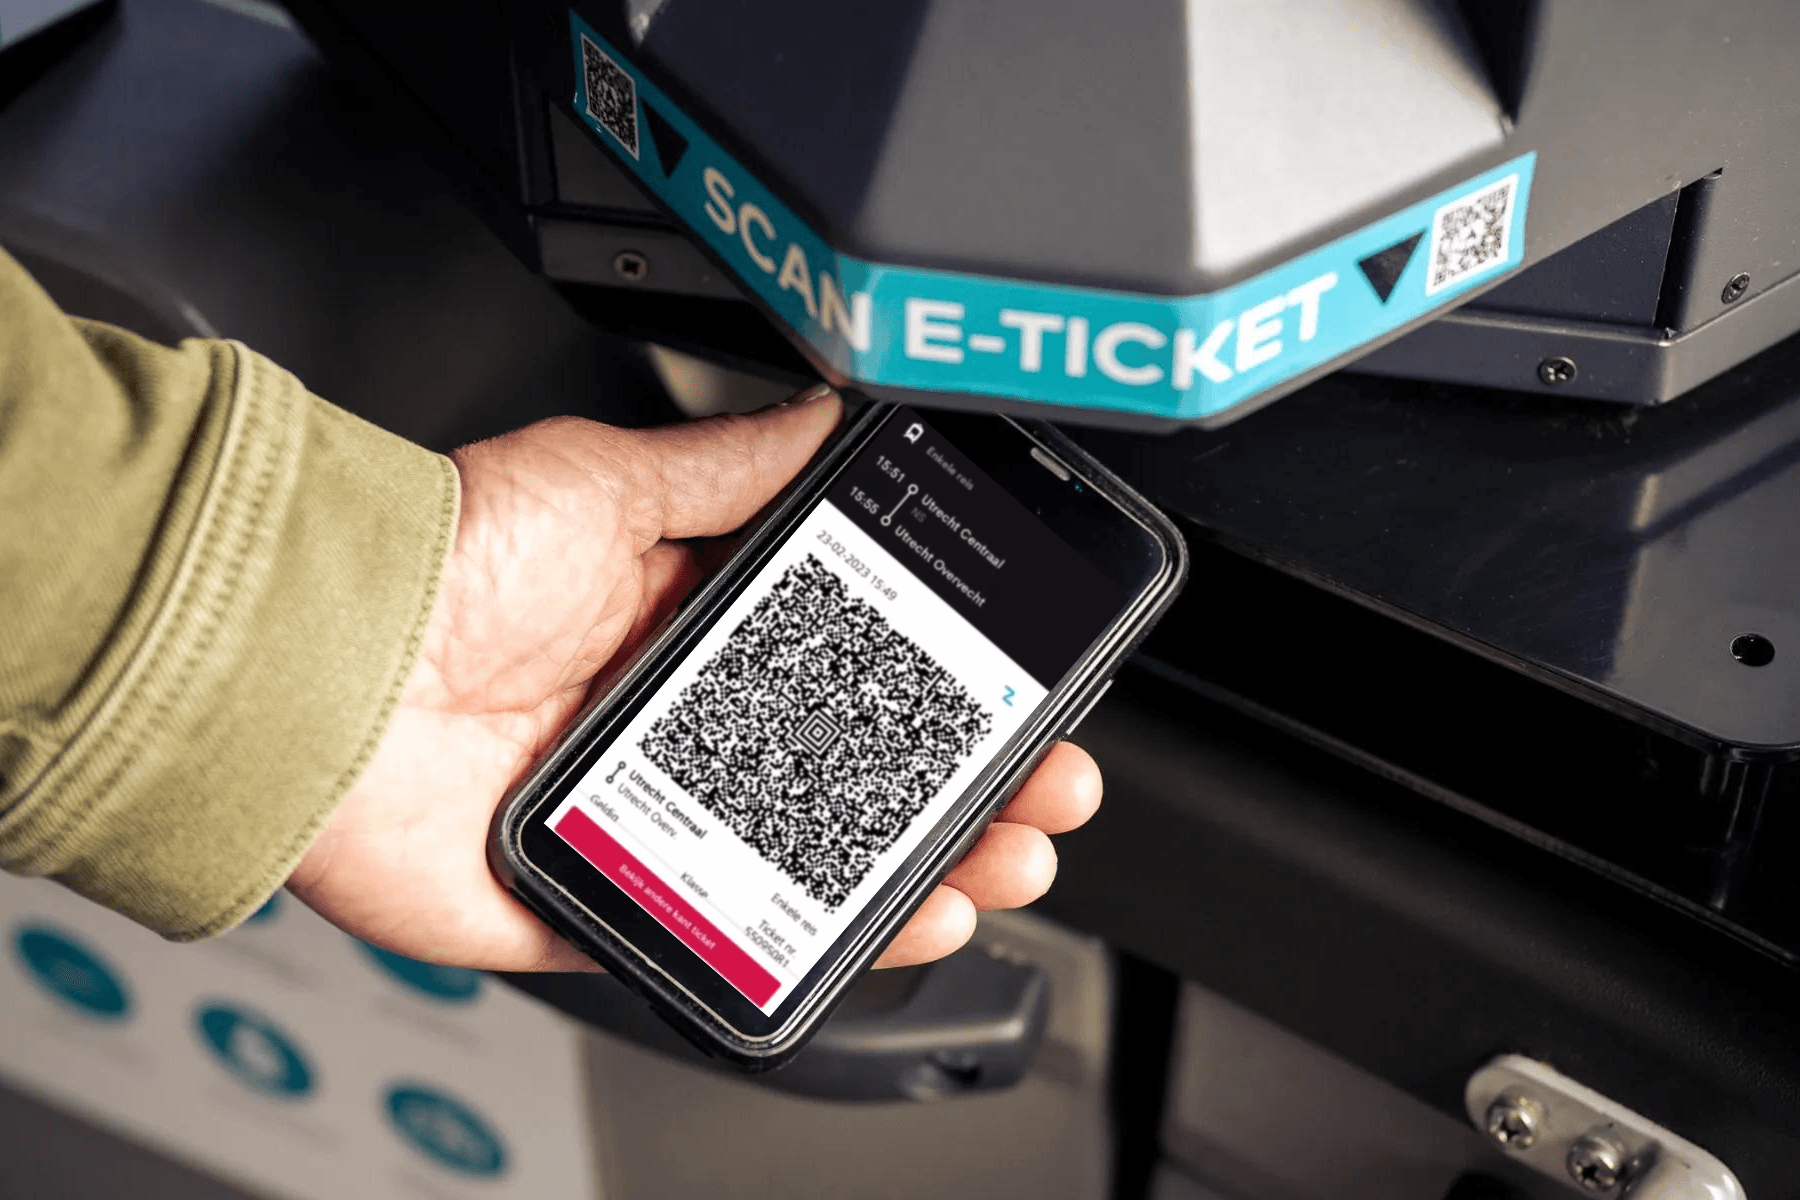 Buy your bus ticket with travel app glimble. Scan the QR code on your ticket when you board the bus. No need to check out.